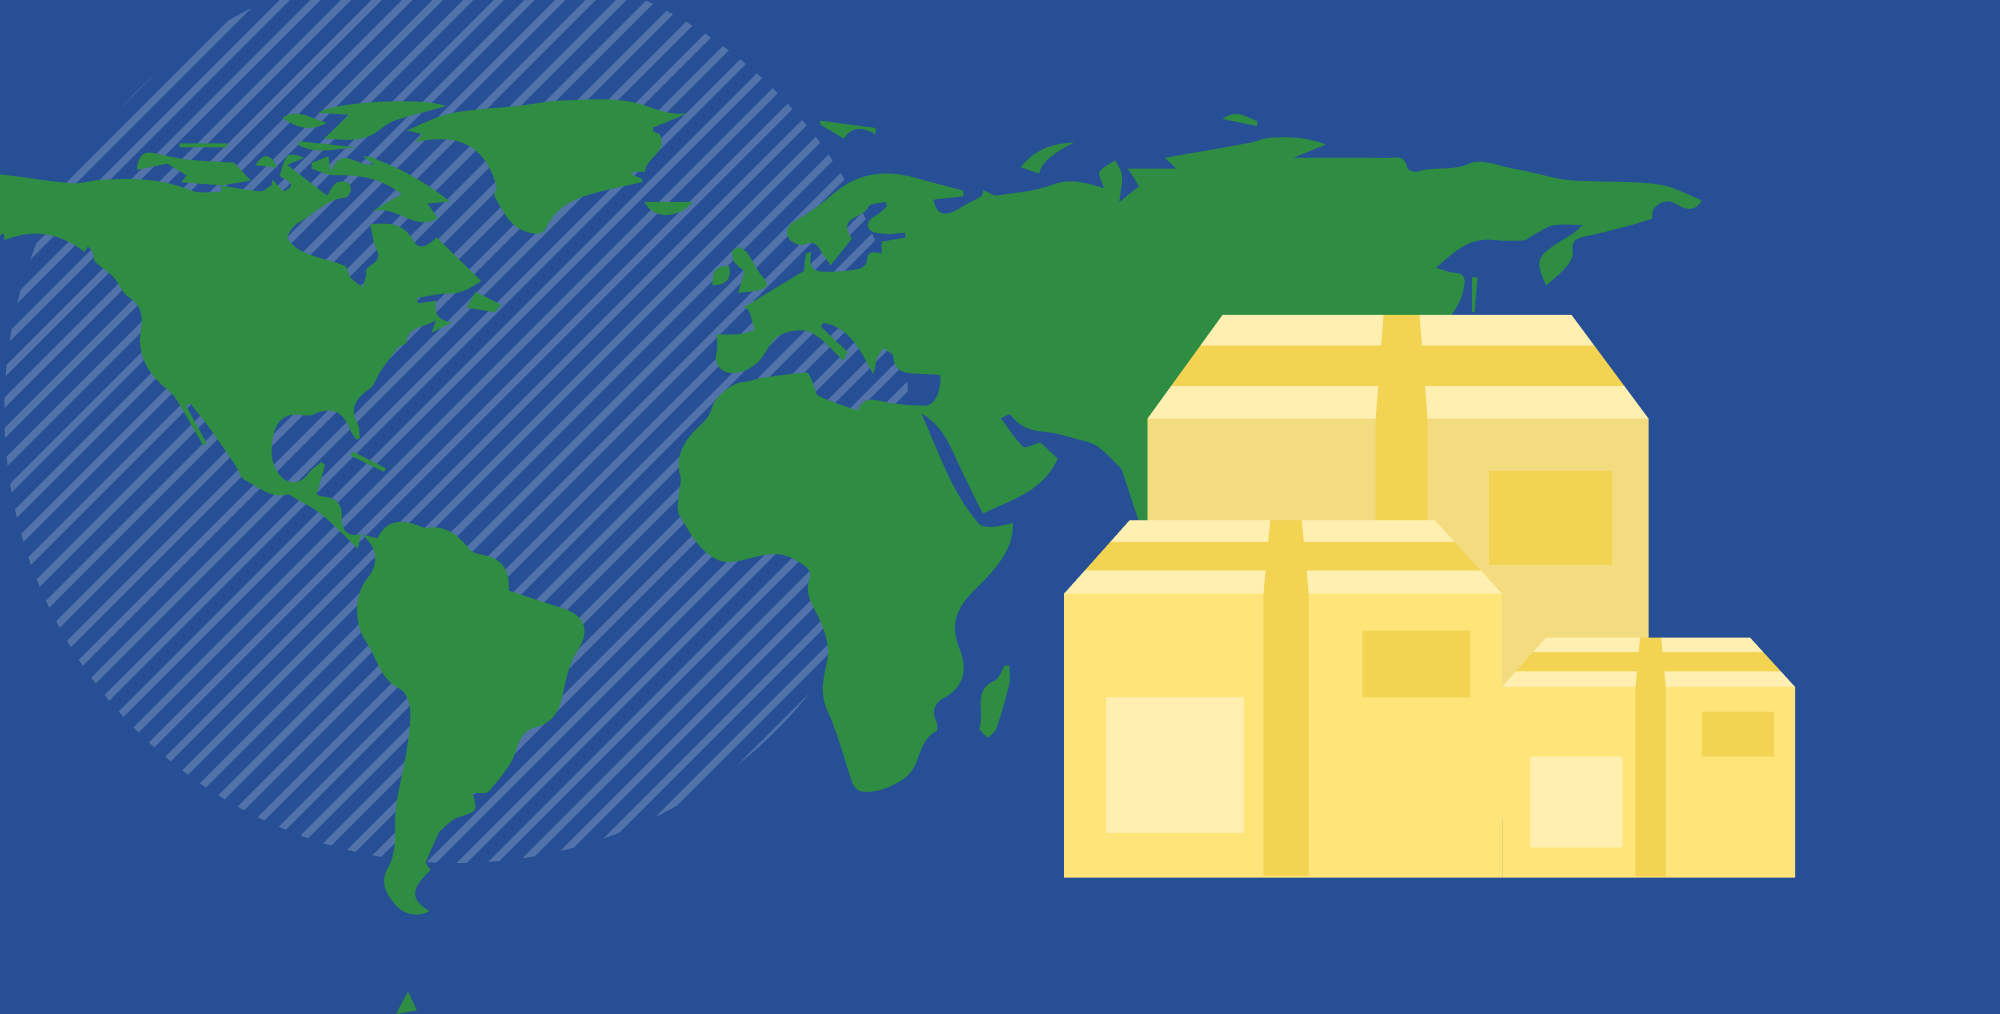 A stack of shipping boxes sits in front of a blue and green map of the world.